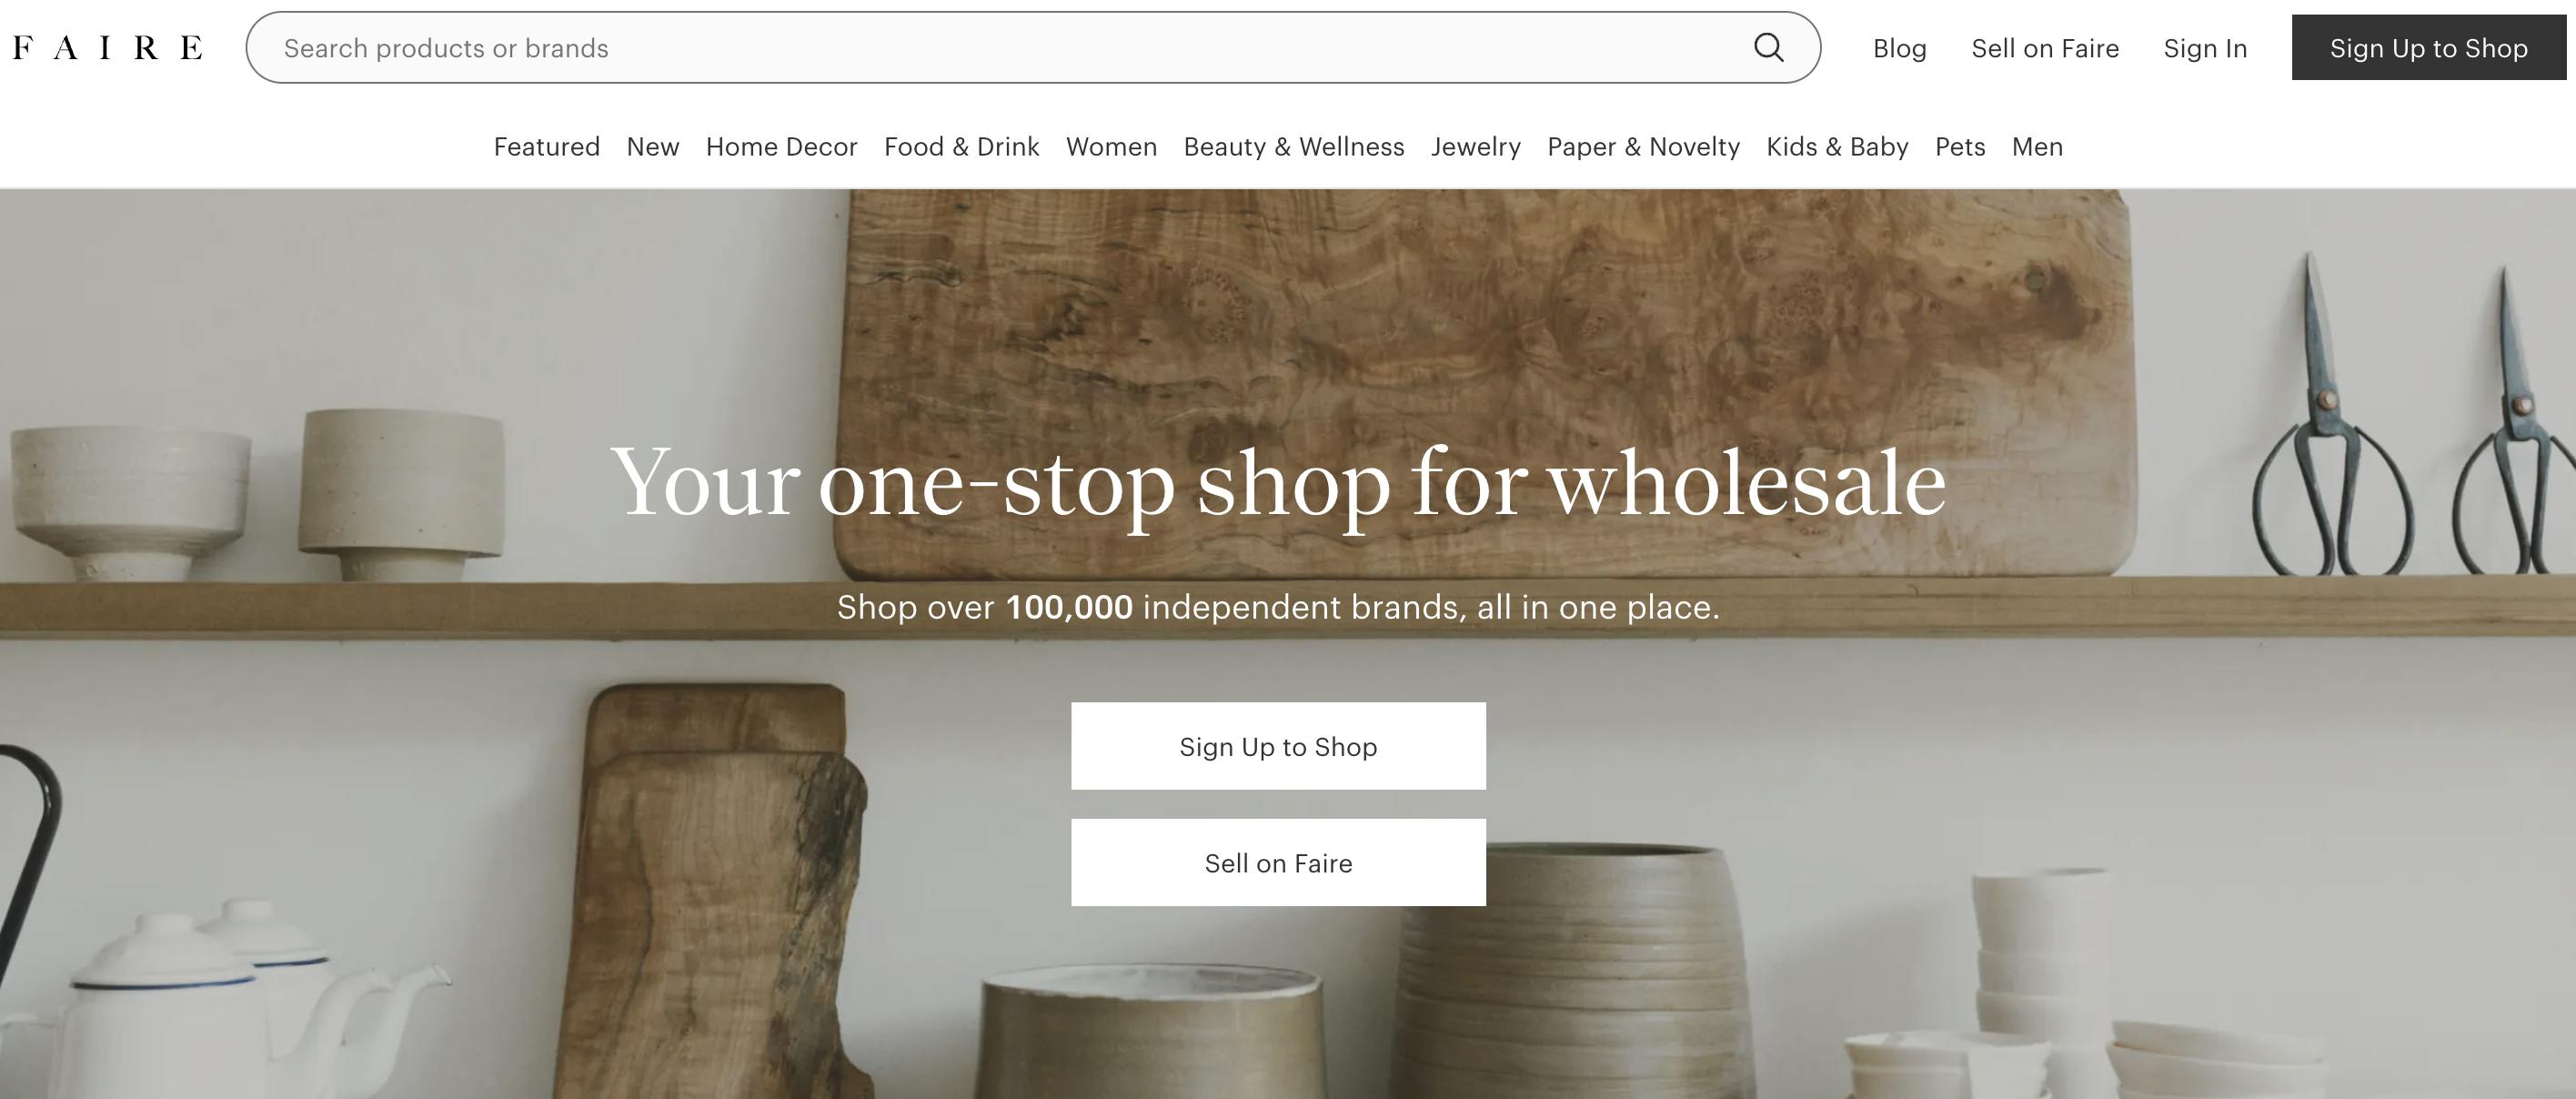 Faire: Buy Wholesale - Buy wholesale from independent brands worldwide